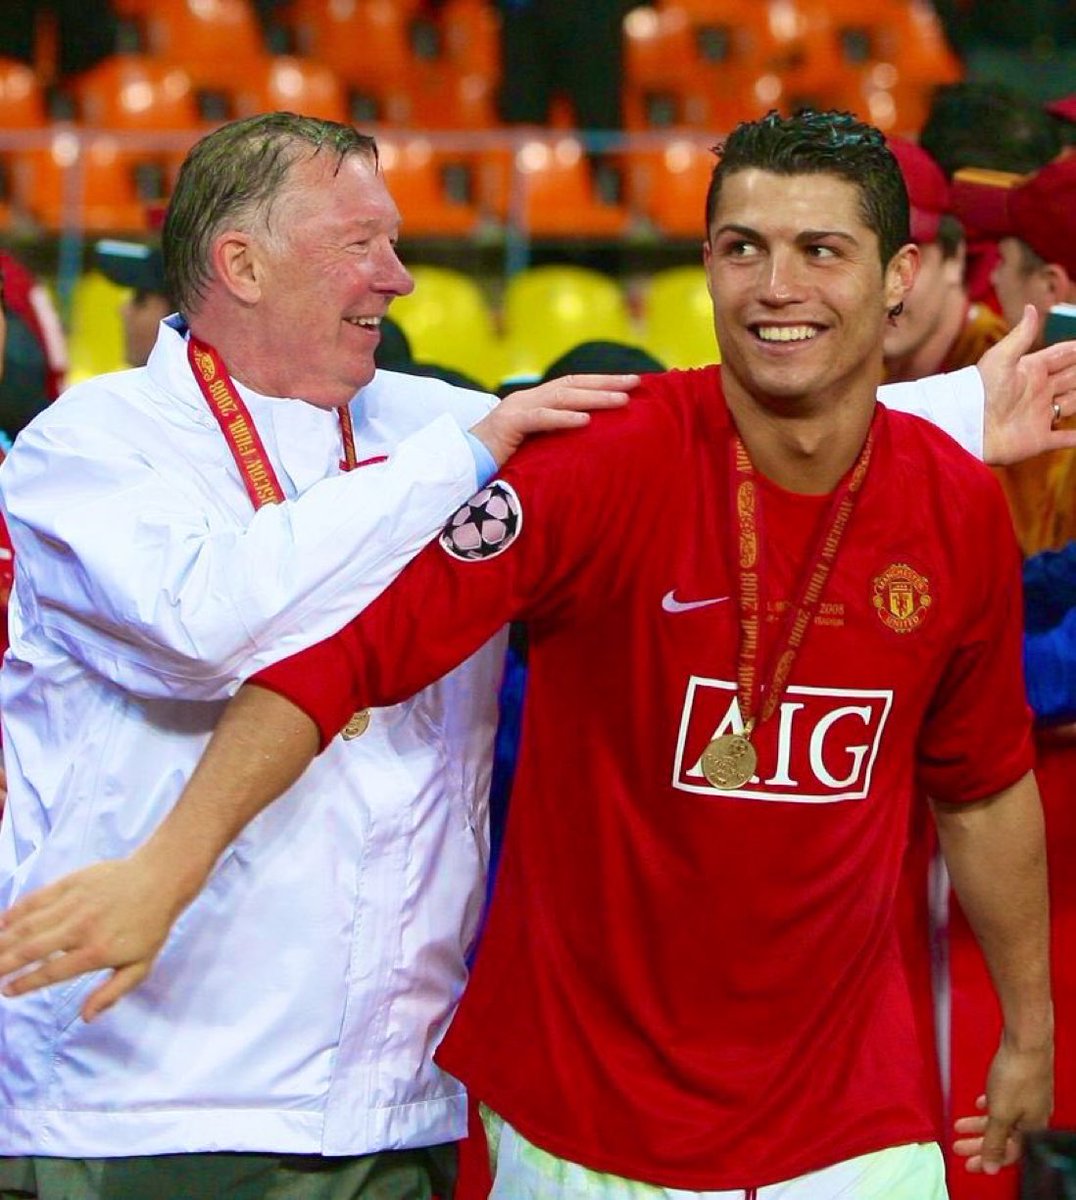 Sir Alex Ferguson: 'If Cristiano had started his career in La Liga, he would have Messi's numbers twice.'